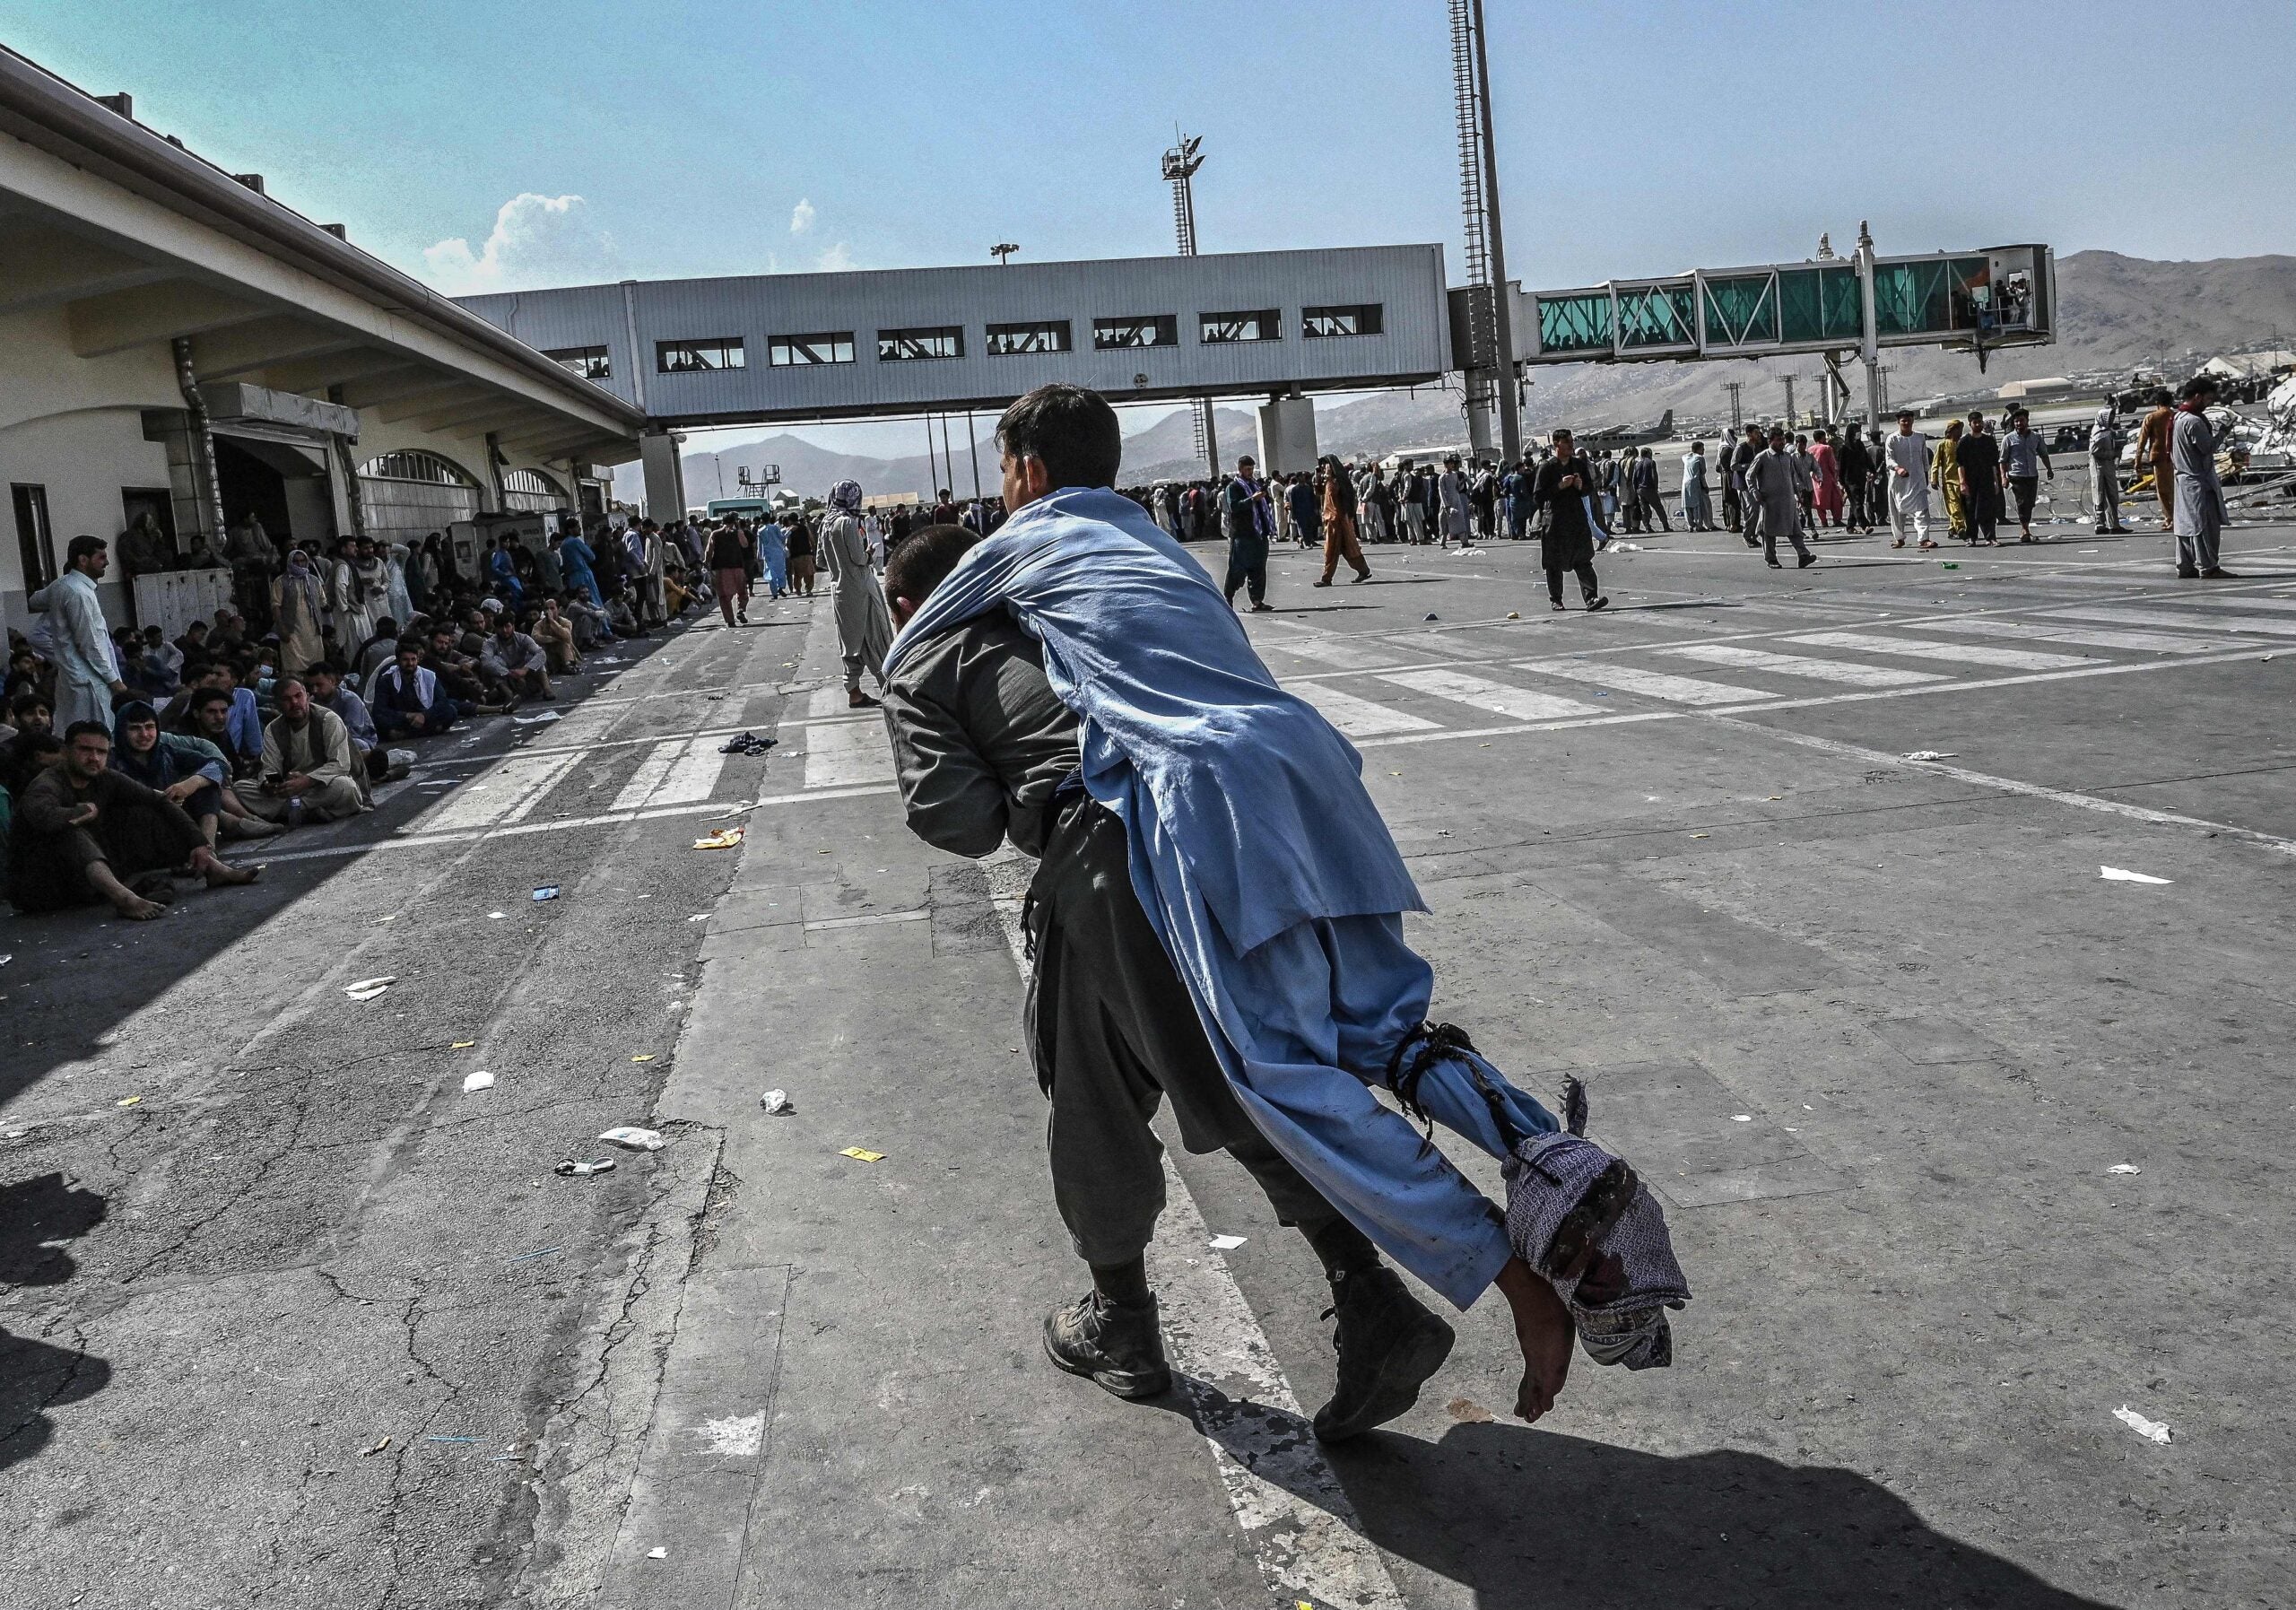 TOPSHOT - A volunteer carries an injured man as other people can be seen waiting at the Kabul airport in Kabul on August 16, 2021, after a stunningly swift end to Afghanistan's 20-year war, as thousands of people mobbed the city's airport trying to flee the group's feared hardline brand of Islamist rule. (Photo by Wakil Kohsar / AFP) (Photo by WAKIL KOHSAR/AFP via Getty Images)